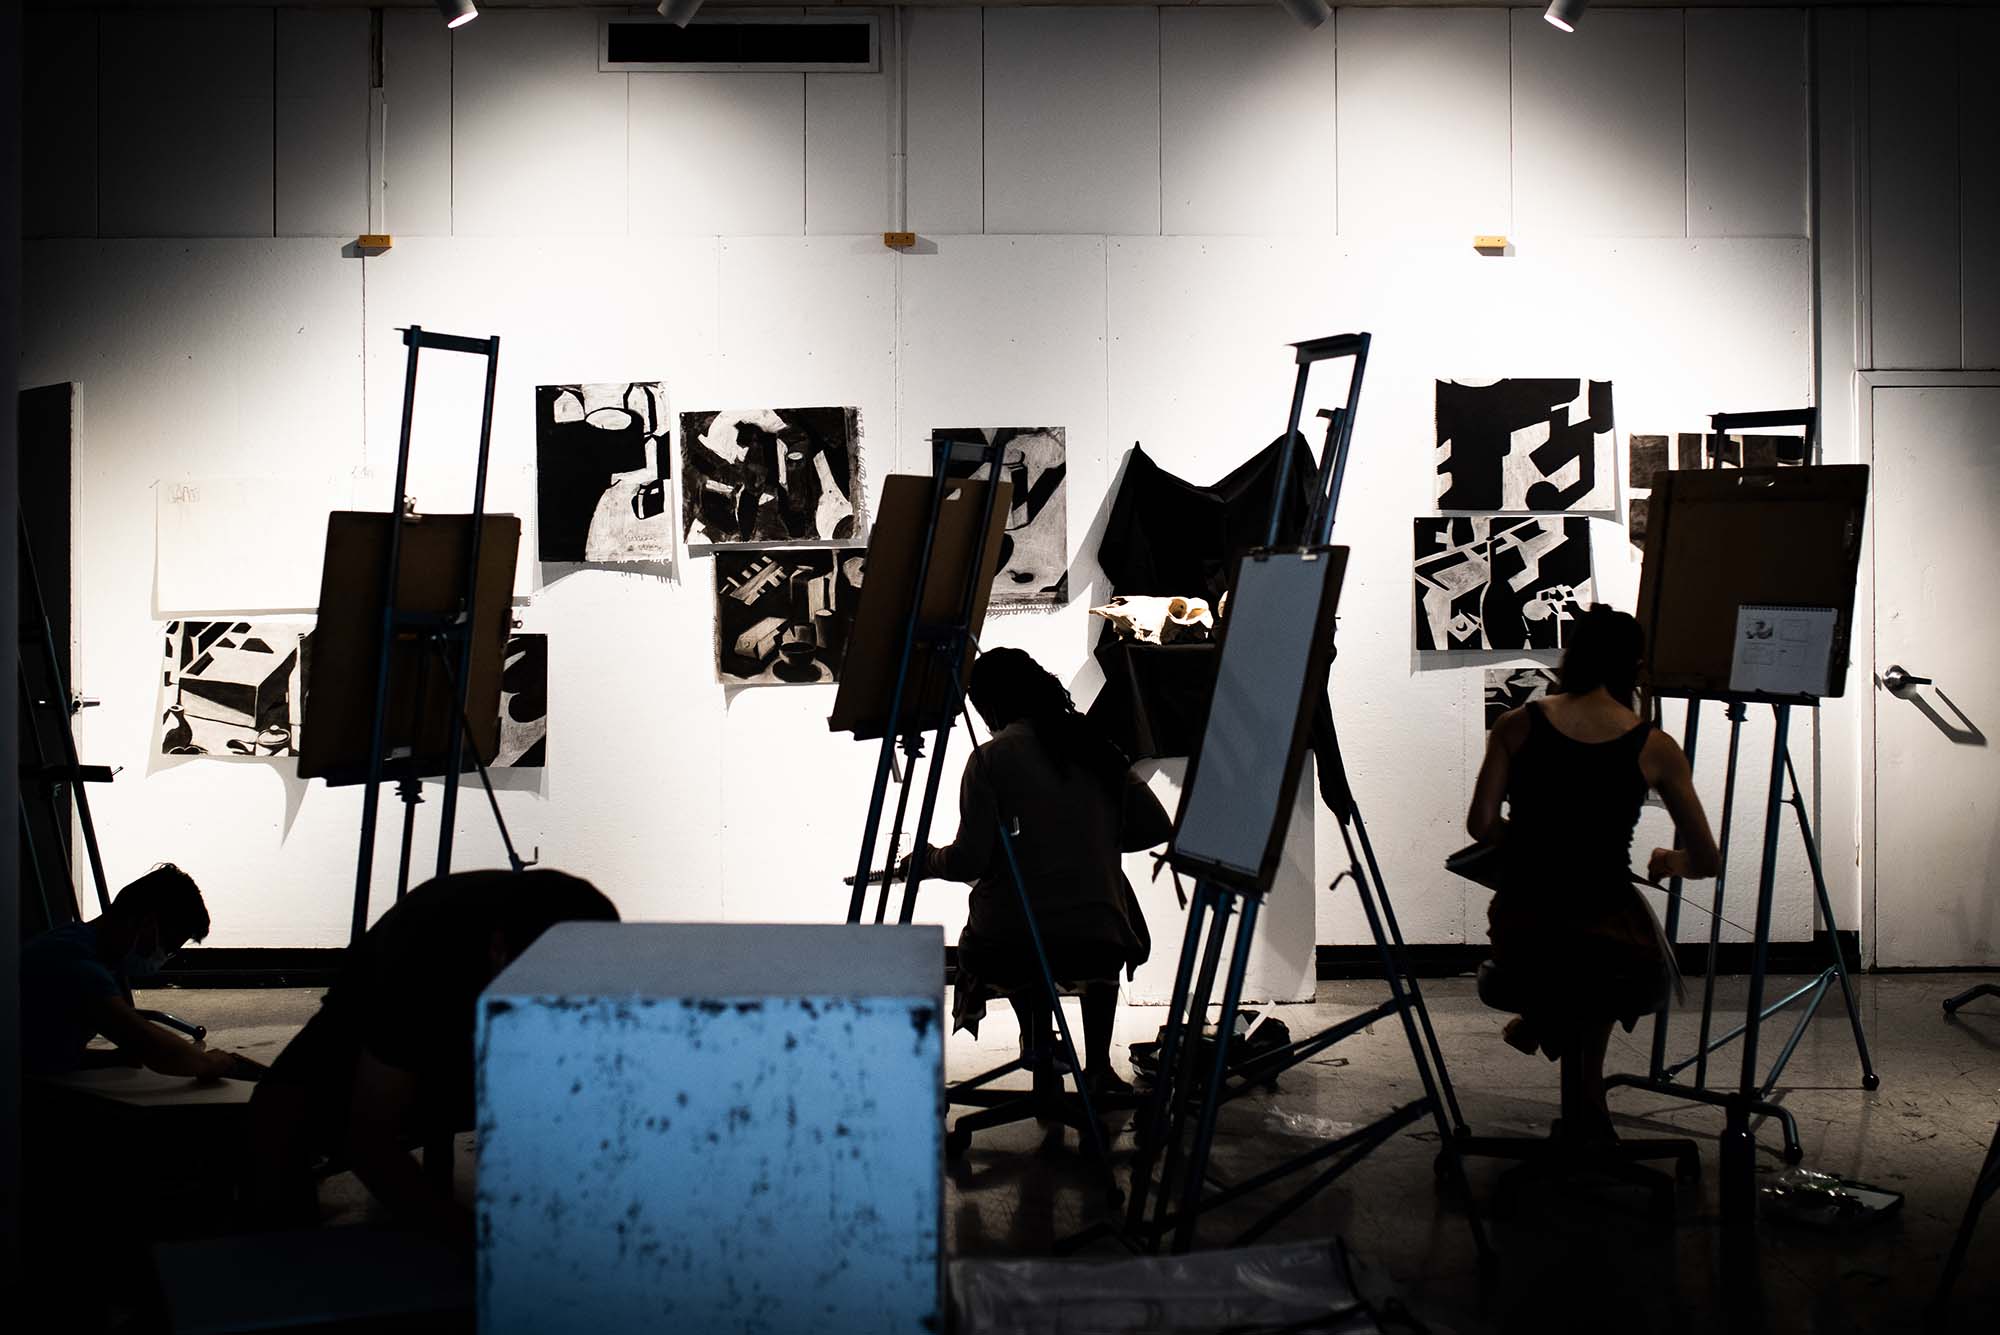 Photo taken from behind students seated at easels as they participate in an Introduction to Drawing class at CFA on June 7, 2022. The are back lit and are seen in silhouette. On a white wall in front of them, large black and white geometric drawings are seen. A white-ish blue box is seen in the left foreground.